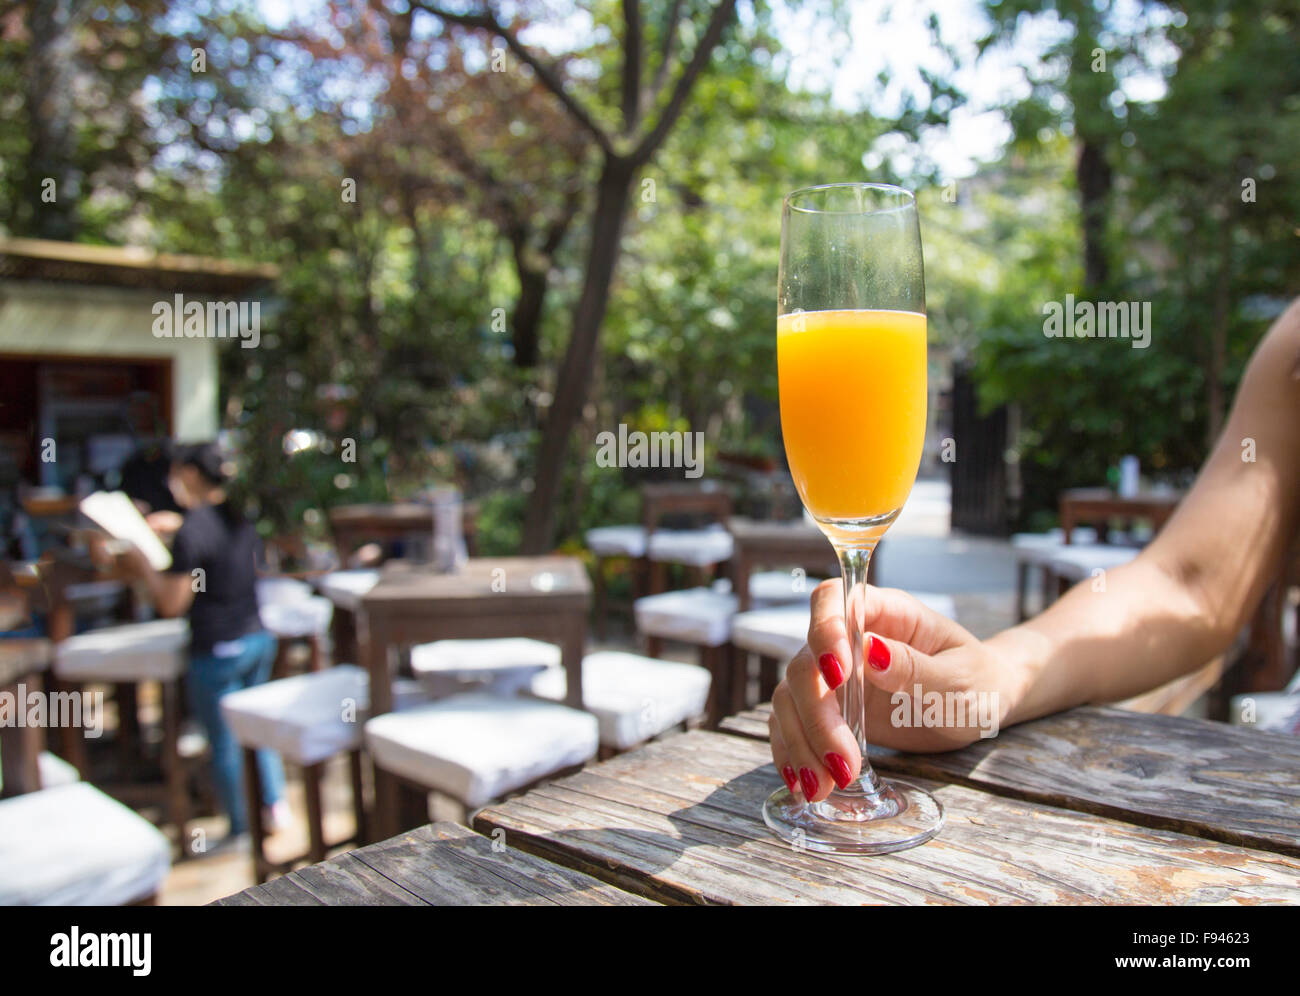 Woman's hand holding a glass of orange juice in beer-garden on a sunny day Stock Photo